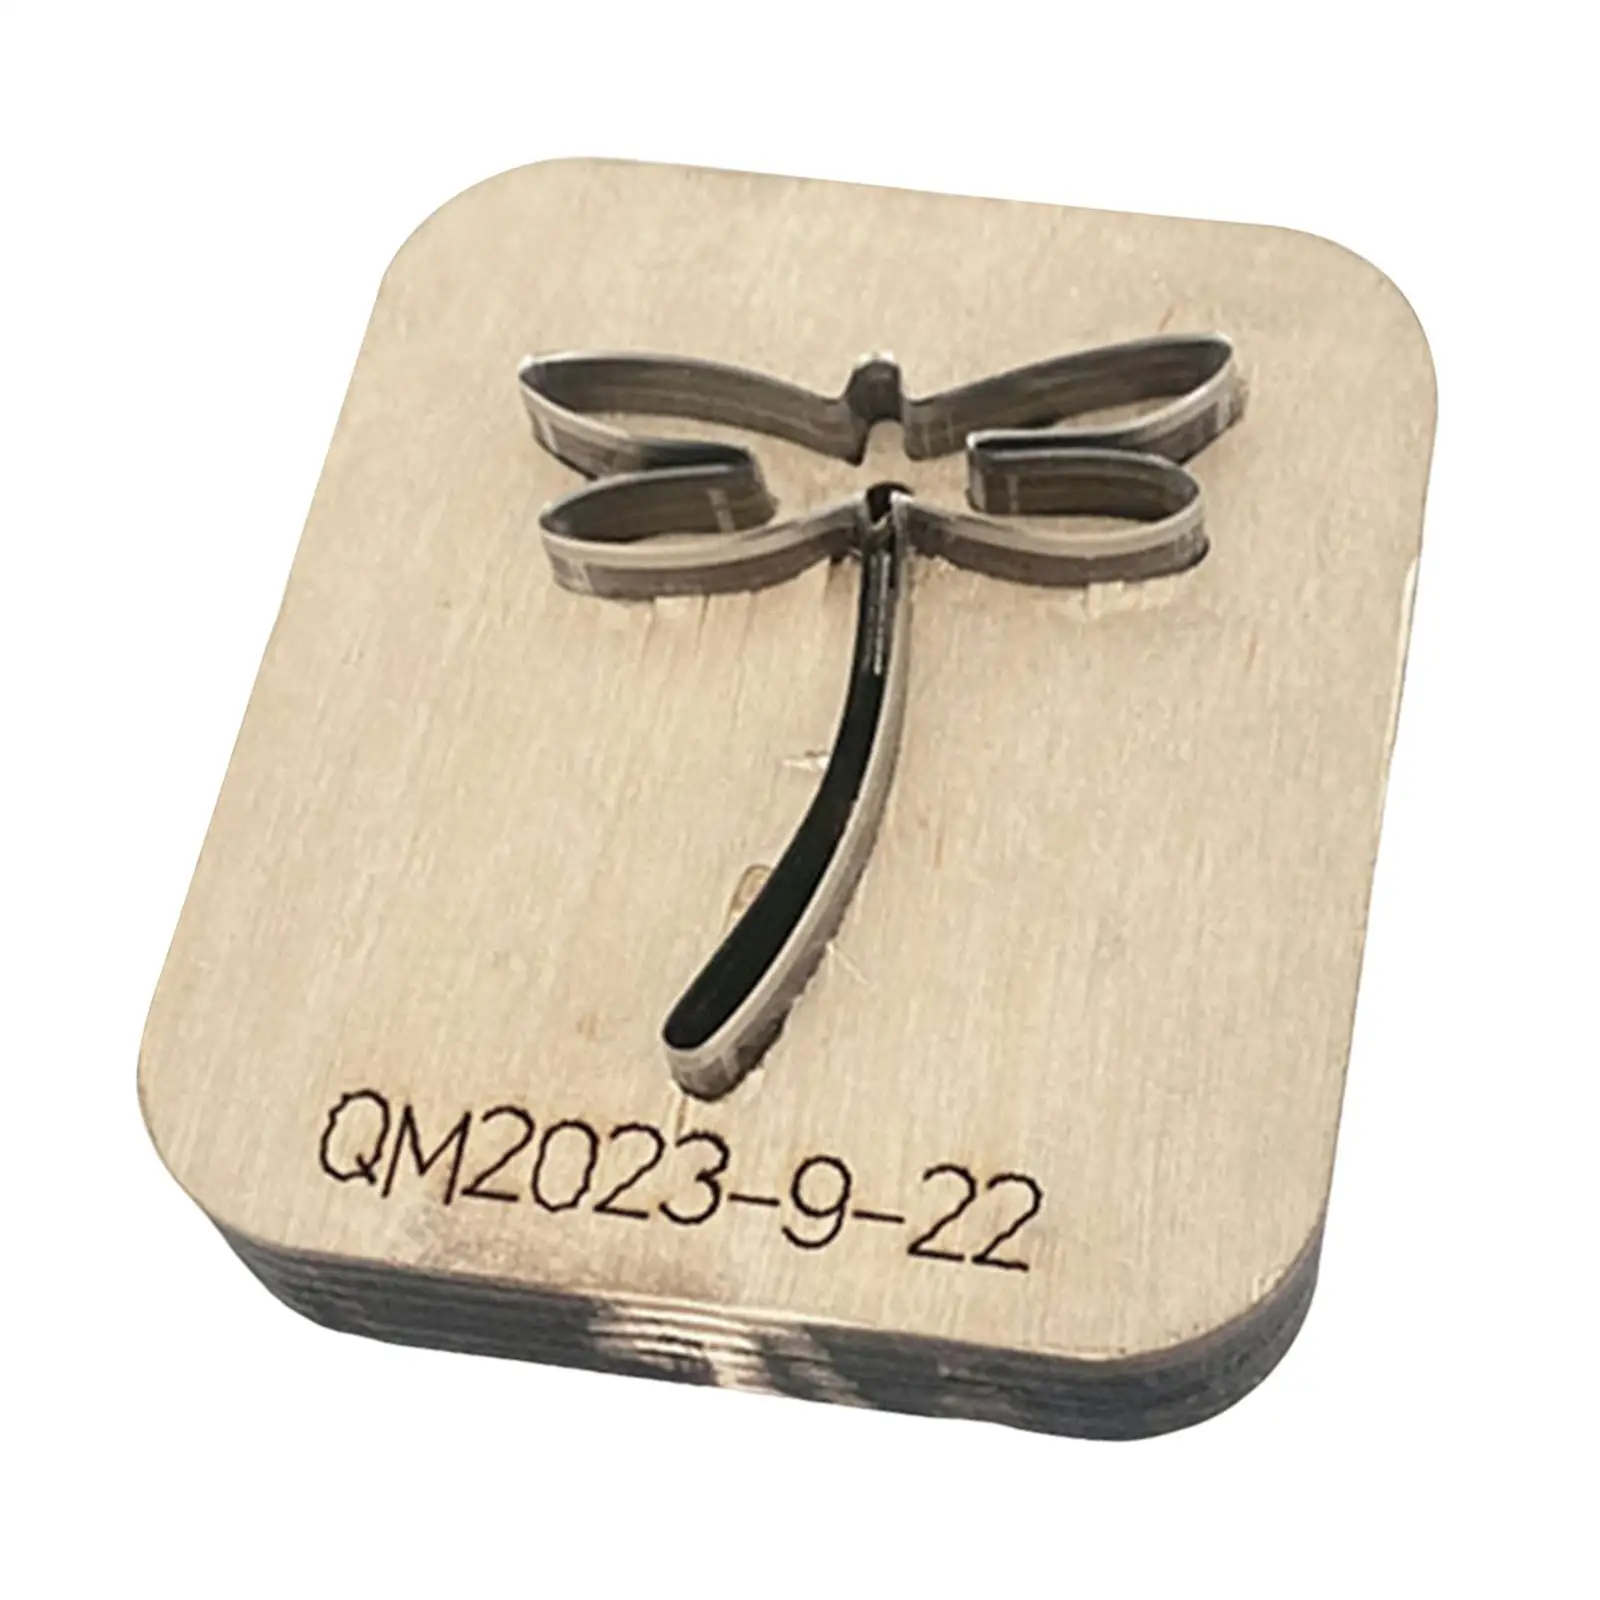 Leather Cutting Die Dragonfly Multipurpose Embossing Wooden Cutting Die Sturdy Home Cutting Tool Leathercraft Punching Template